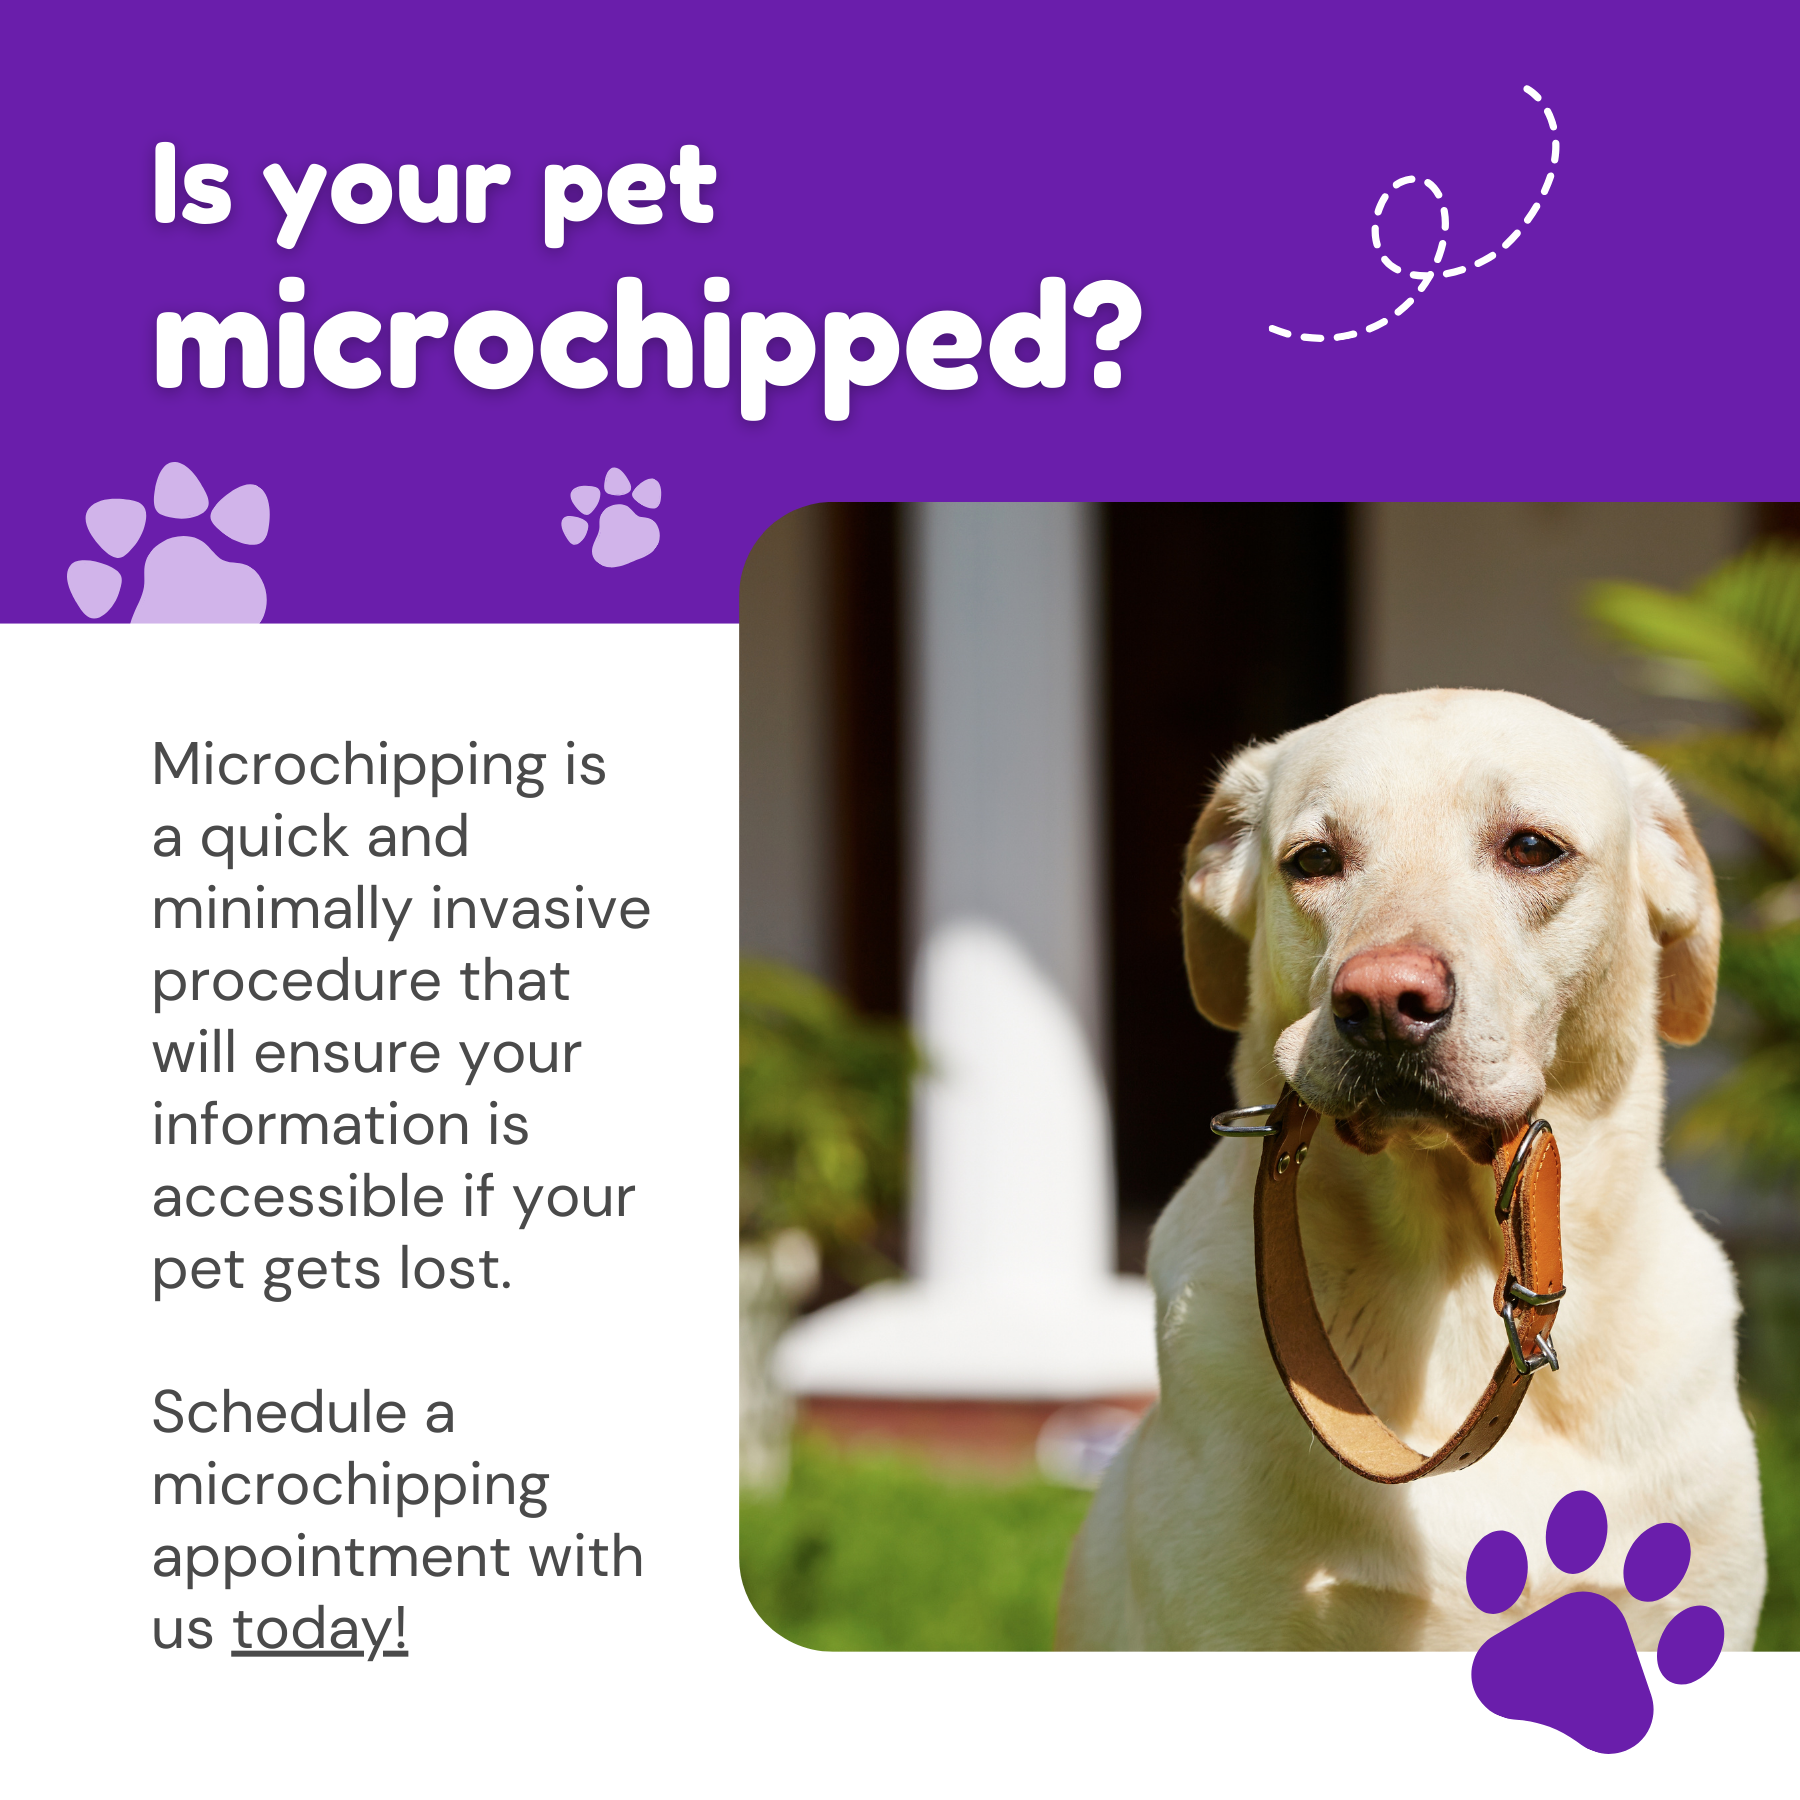 Is your pet microchipped?